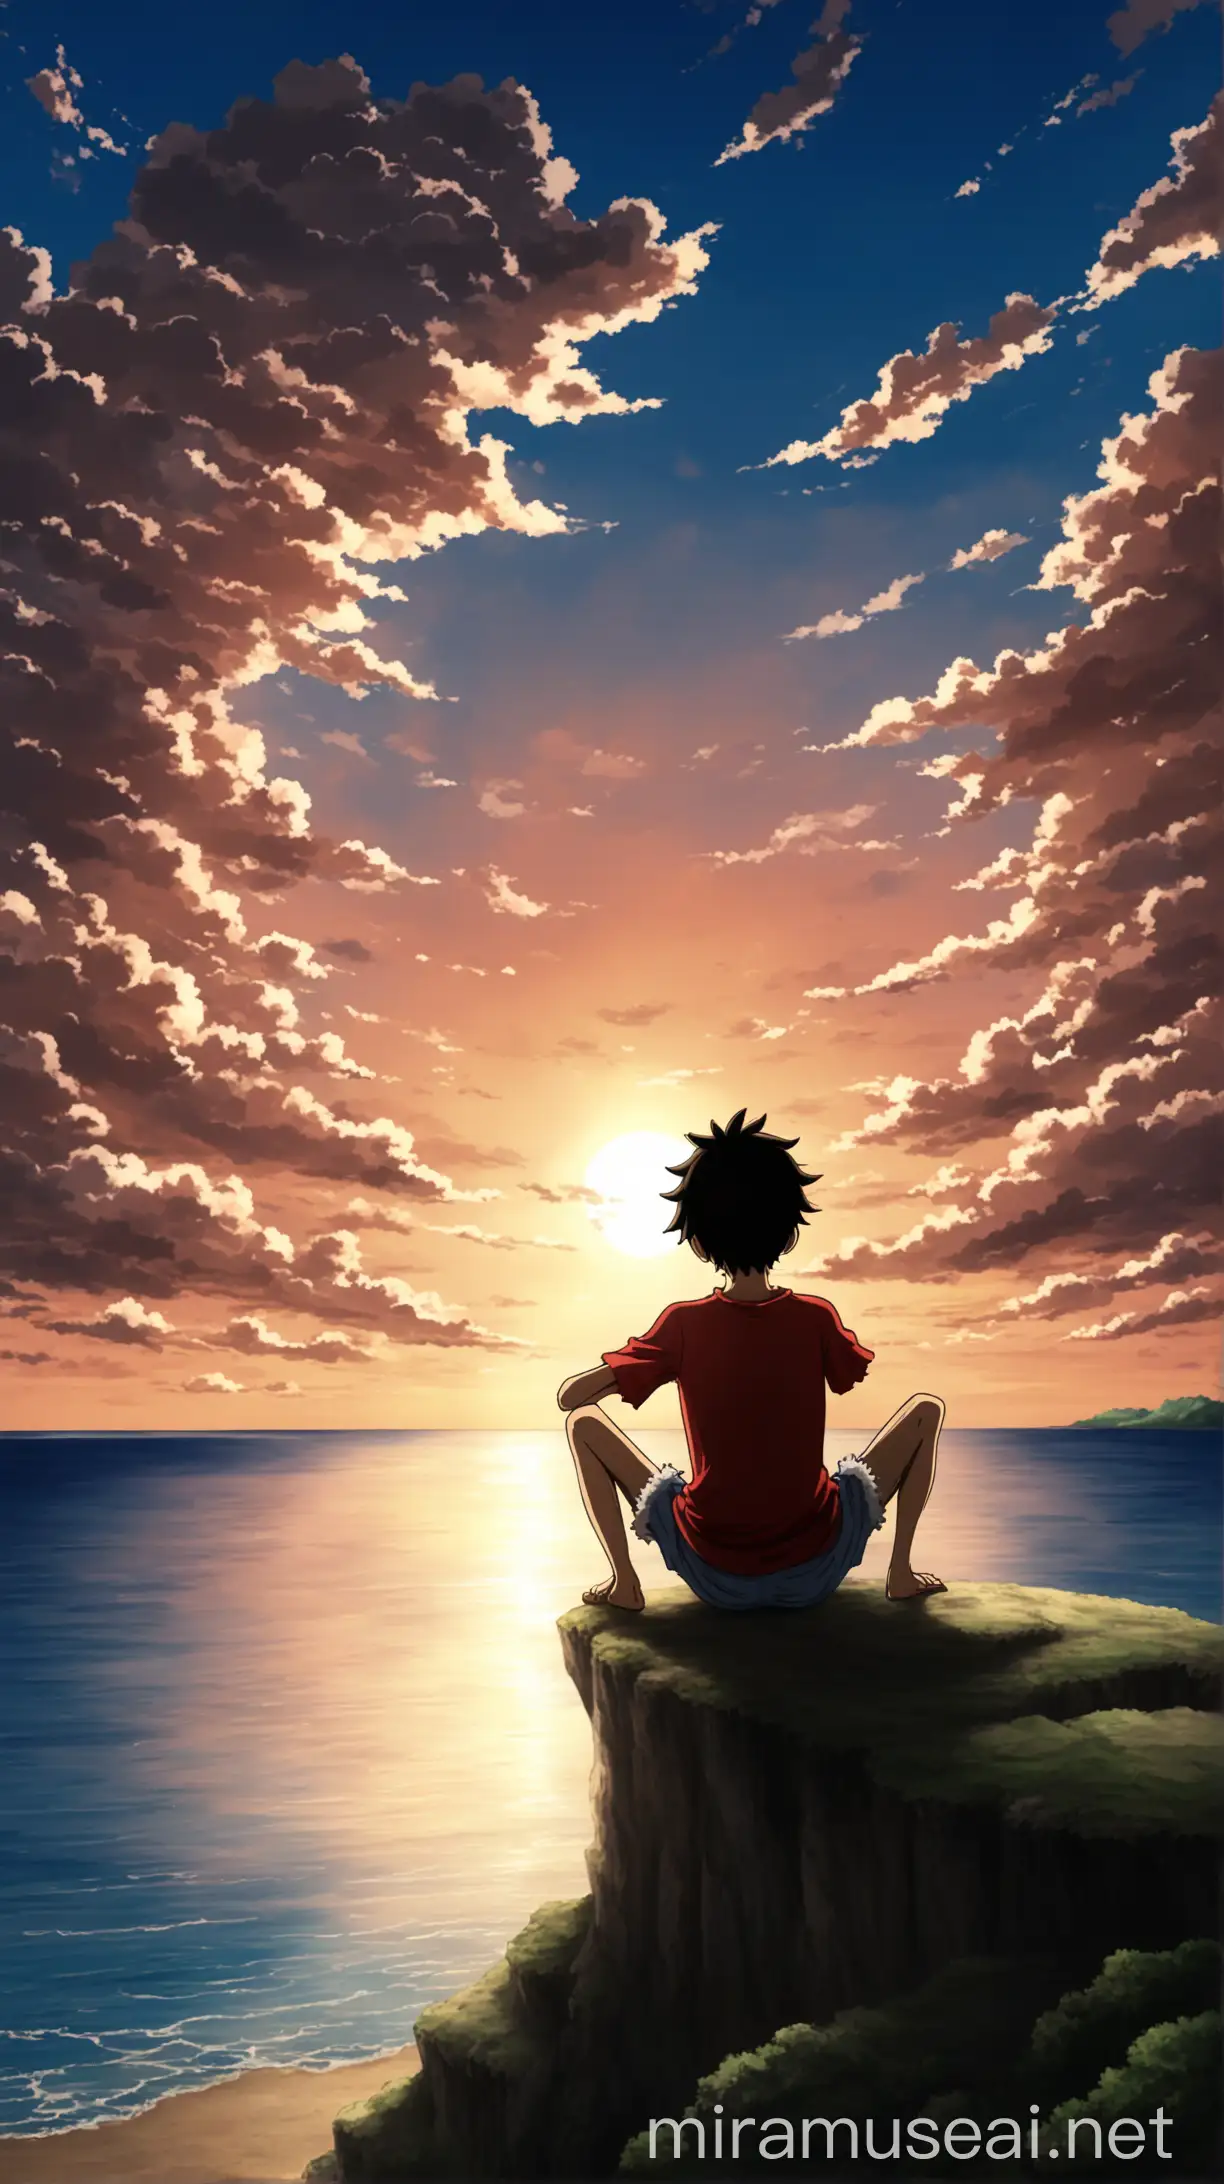 luffy sitting in the subset with pretty clouds near the ocean